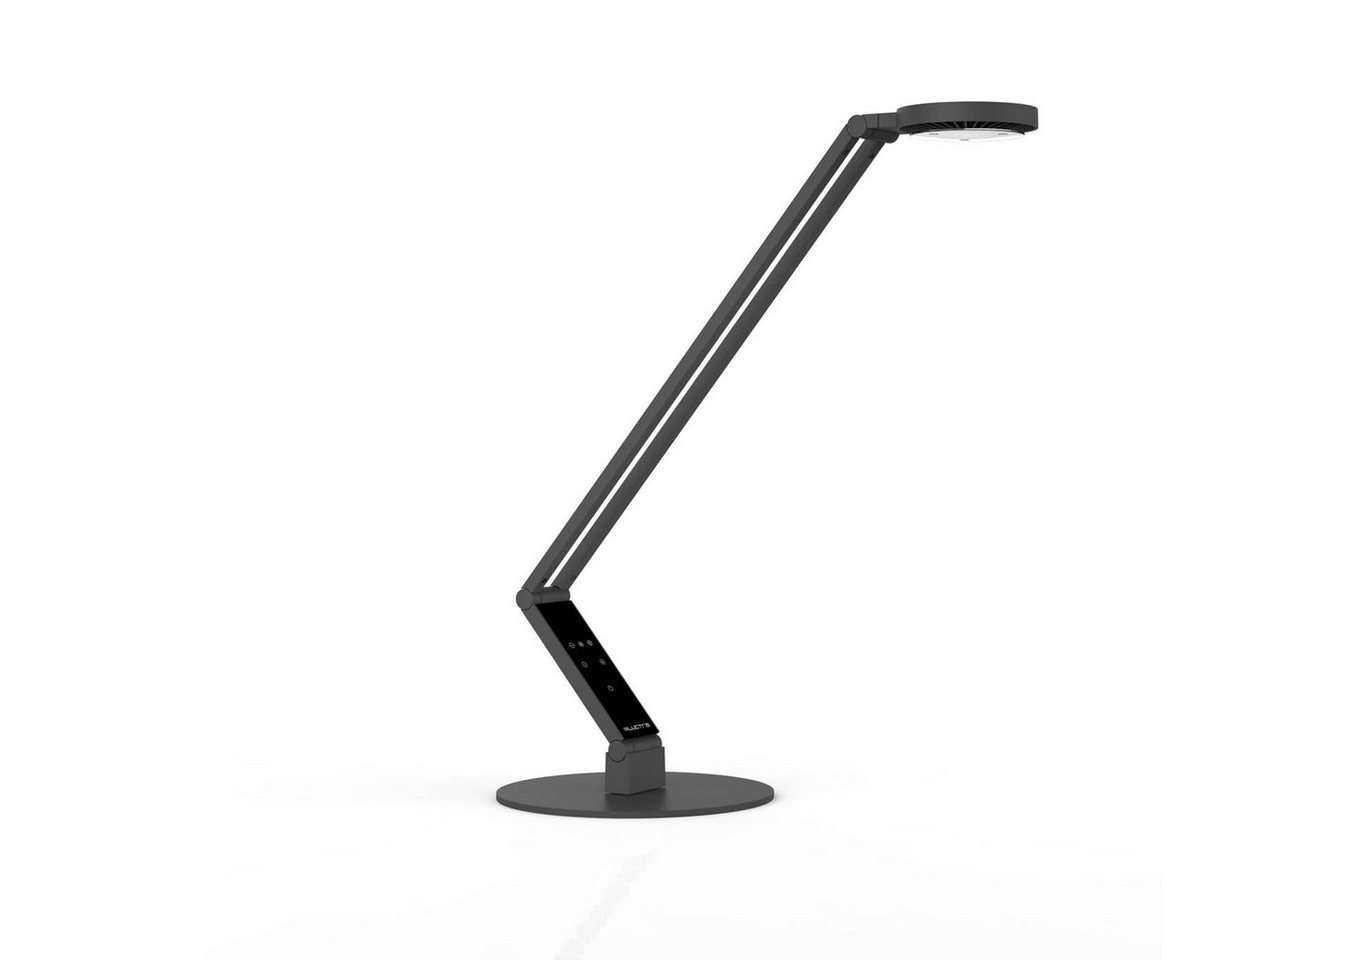 LUCTRA Tischleuchte TABLE RADIAL BASE, LUCTRA Table Radial Base Schreibtischlampe LED Dimmbar, LED Schreibtis von LUCTRA